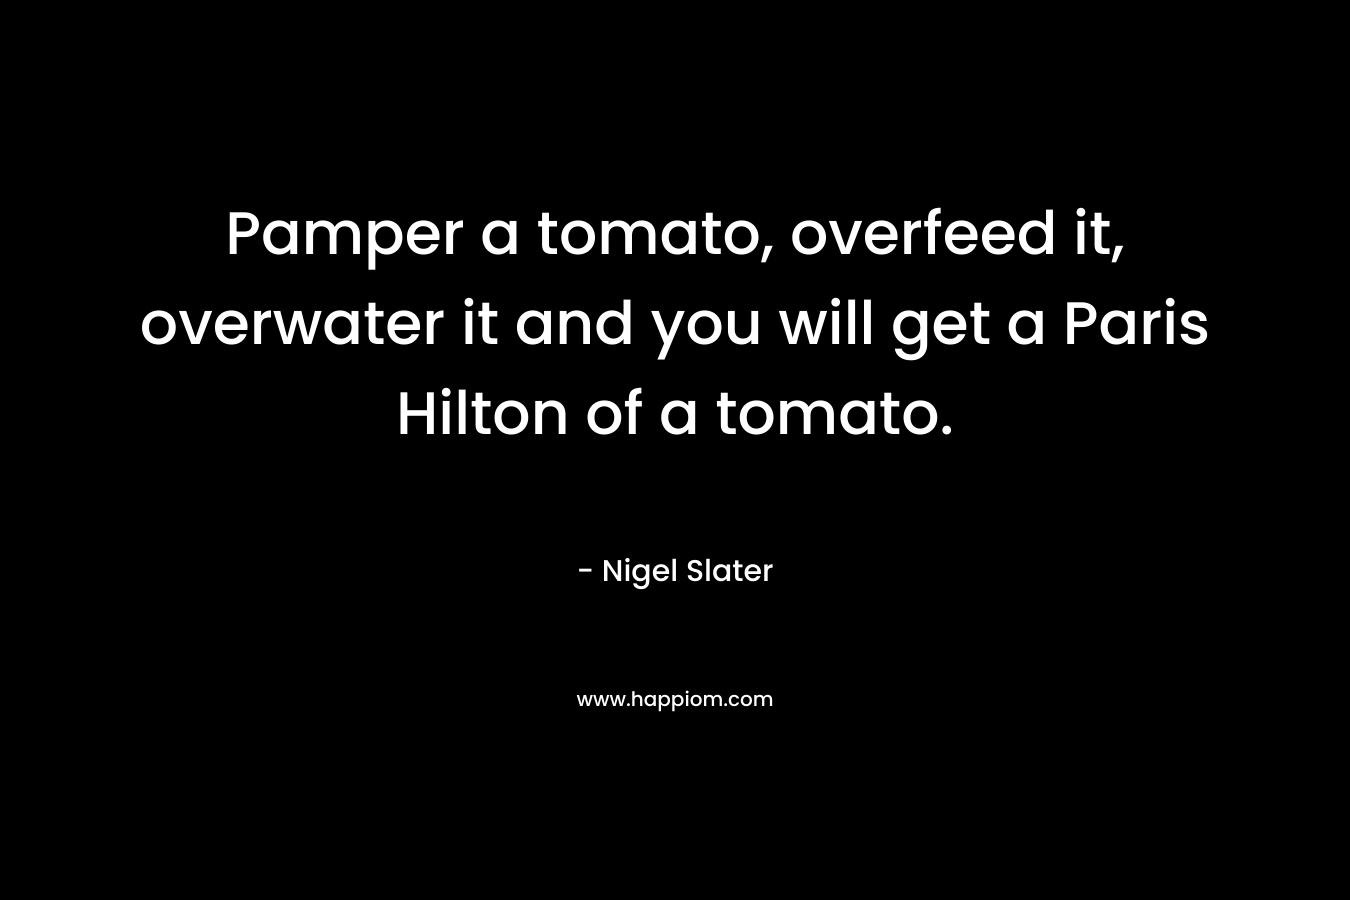 Pamper a tomato, overfeed it, overwater it and you will get a Paris Hilton of a tomato. – Nigel Slater